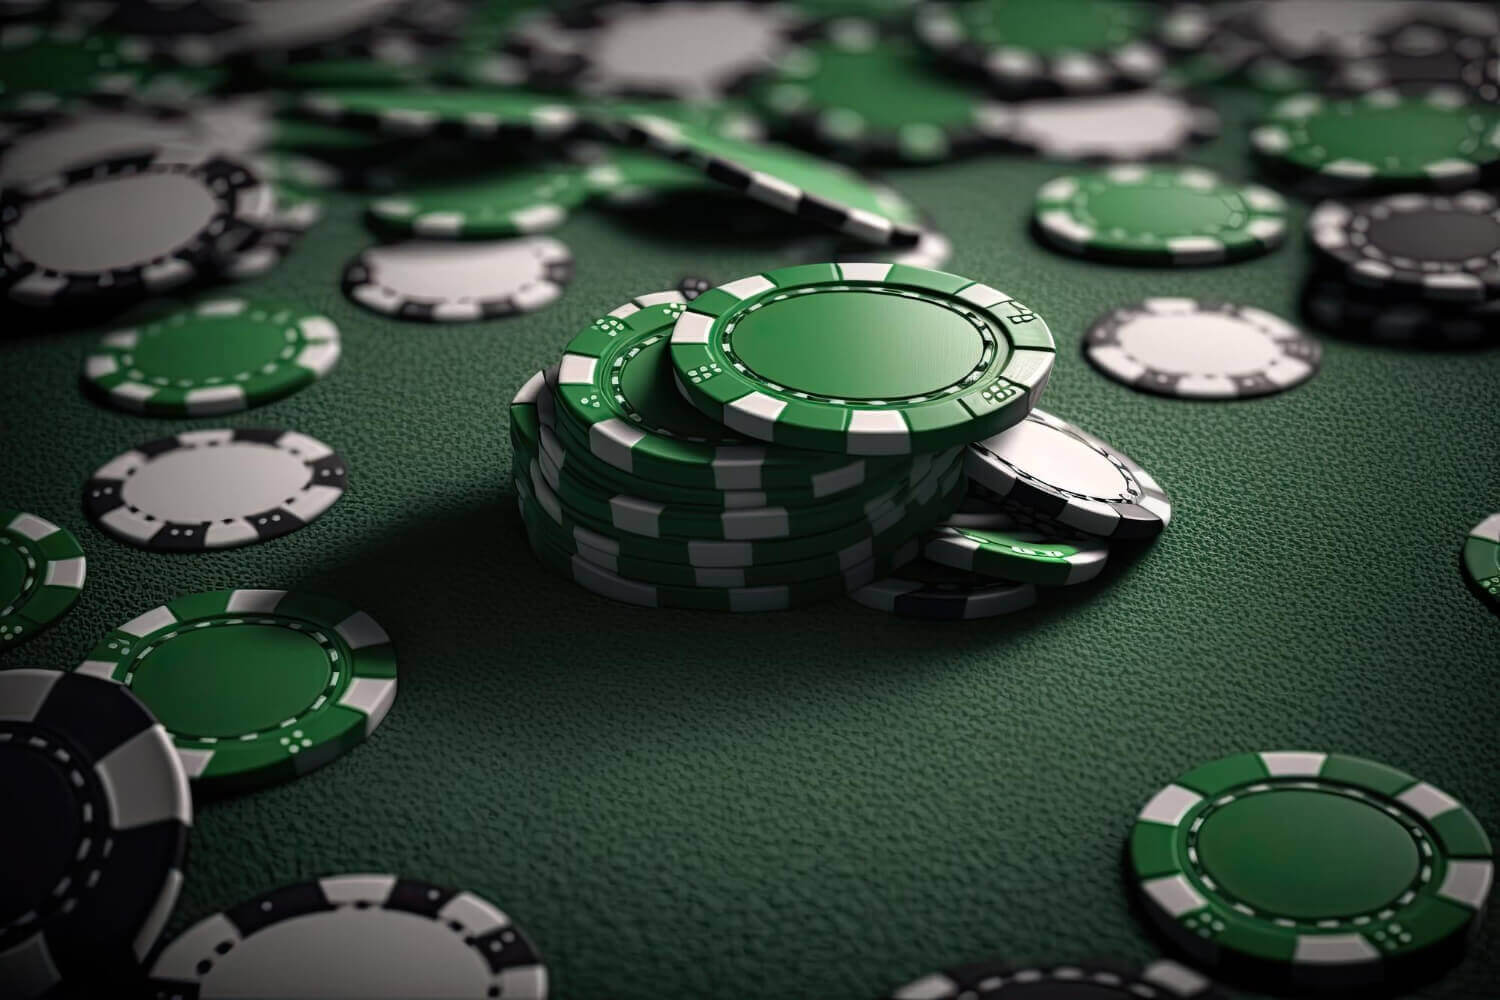 How to Create Casino Website: Cost & Features